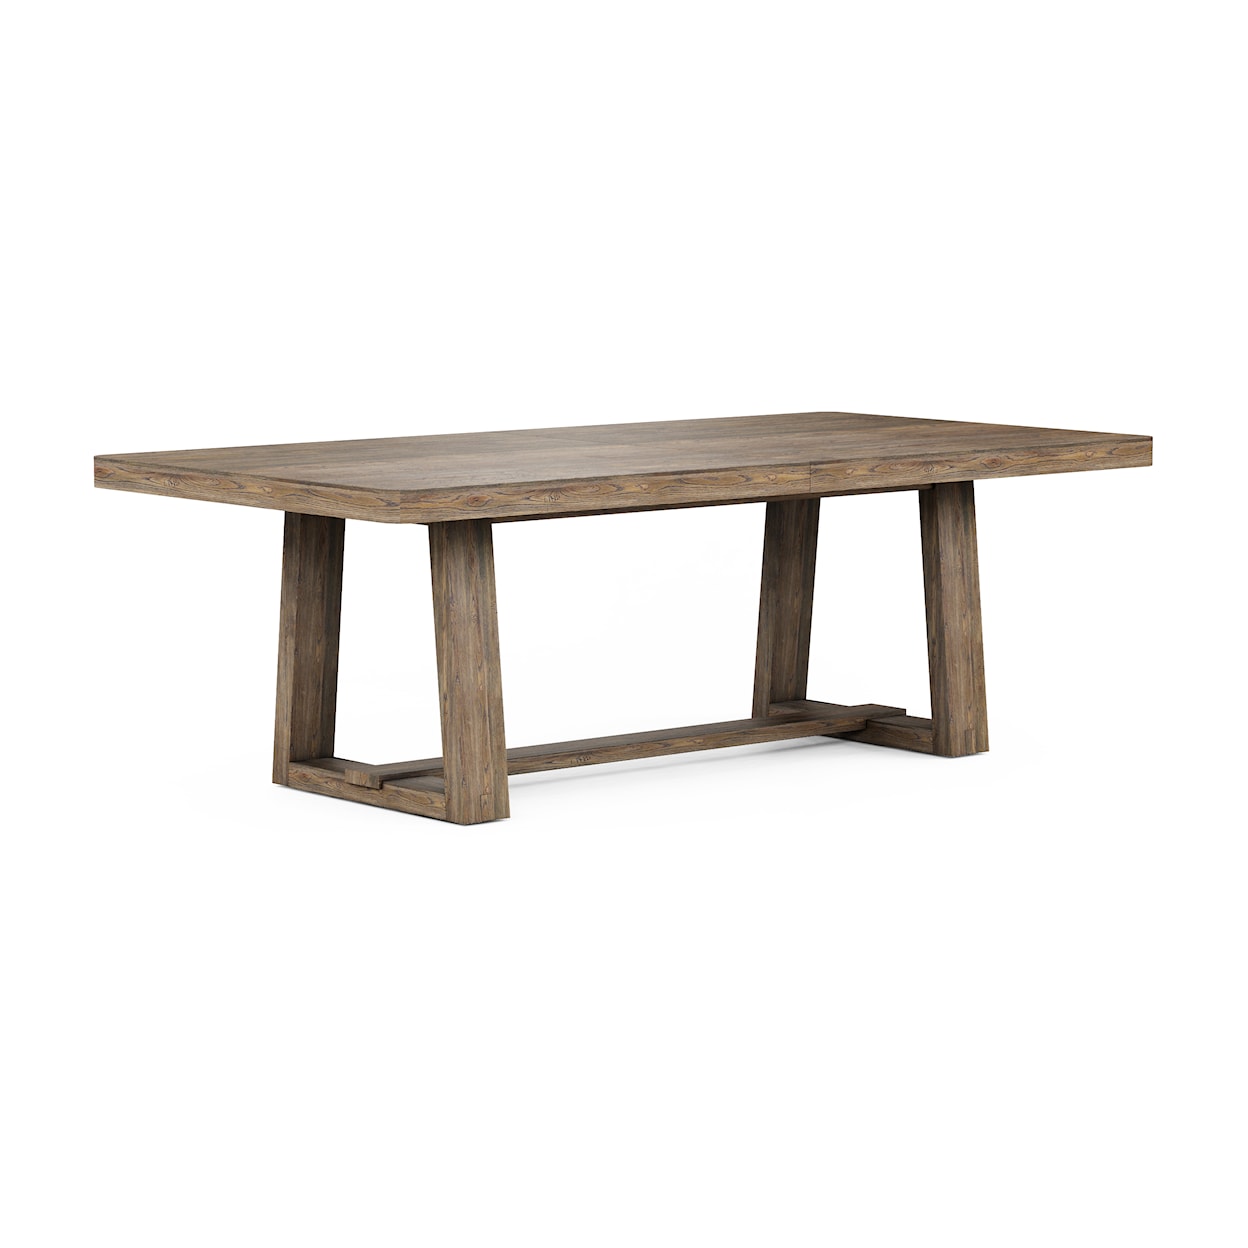 A.R.T. Furniture Inc Stockyard Dining Table 